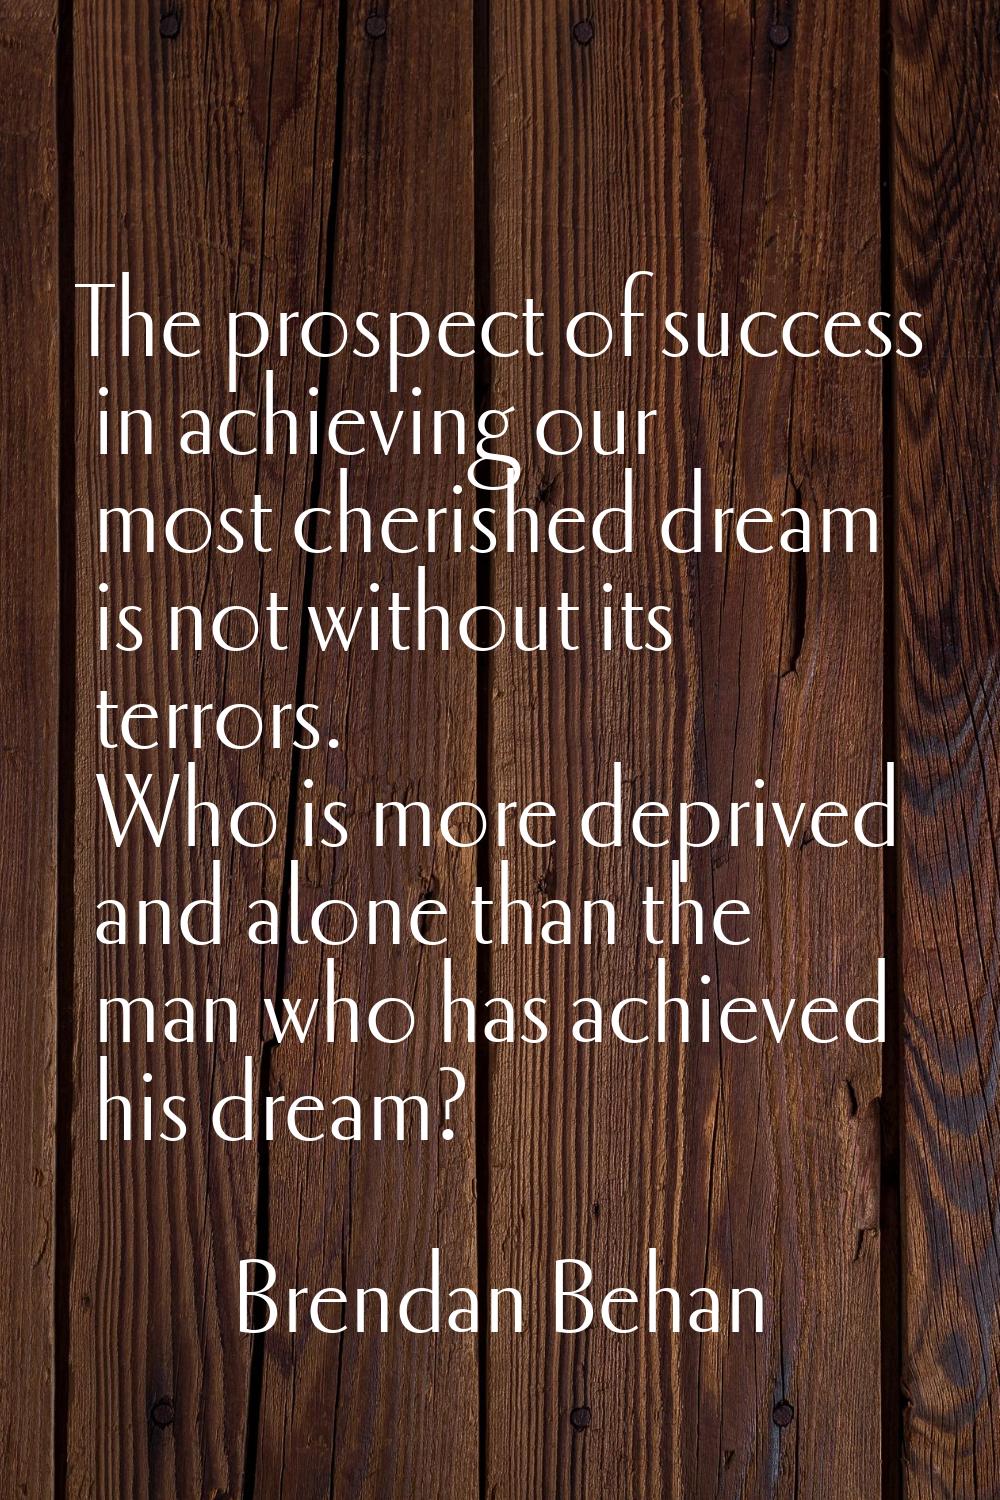 The prospect of success in achieving our most cherished dream is not without its terrors. Who is mo